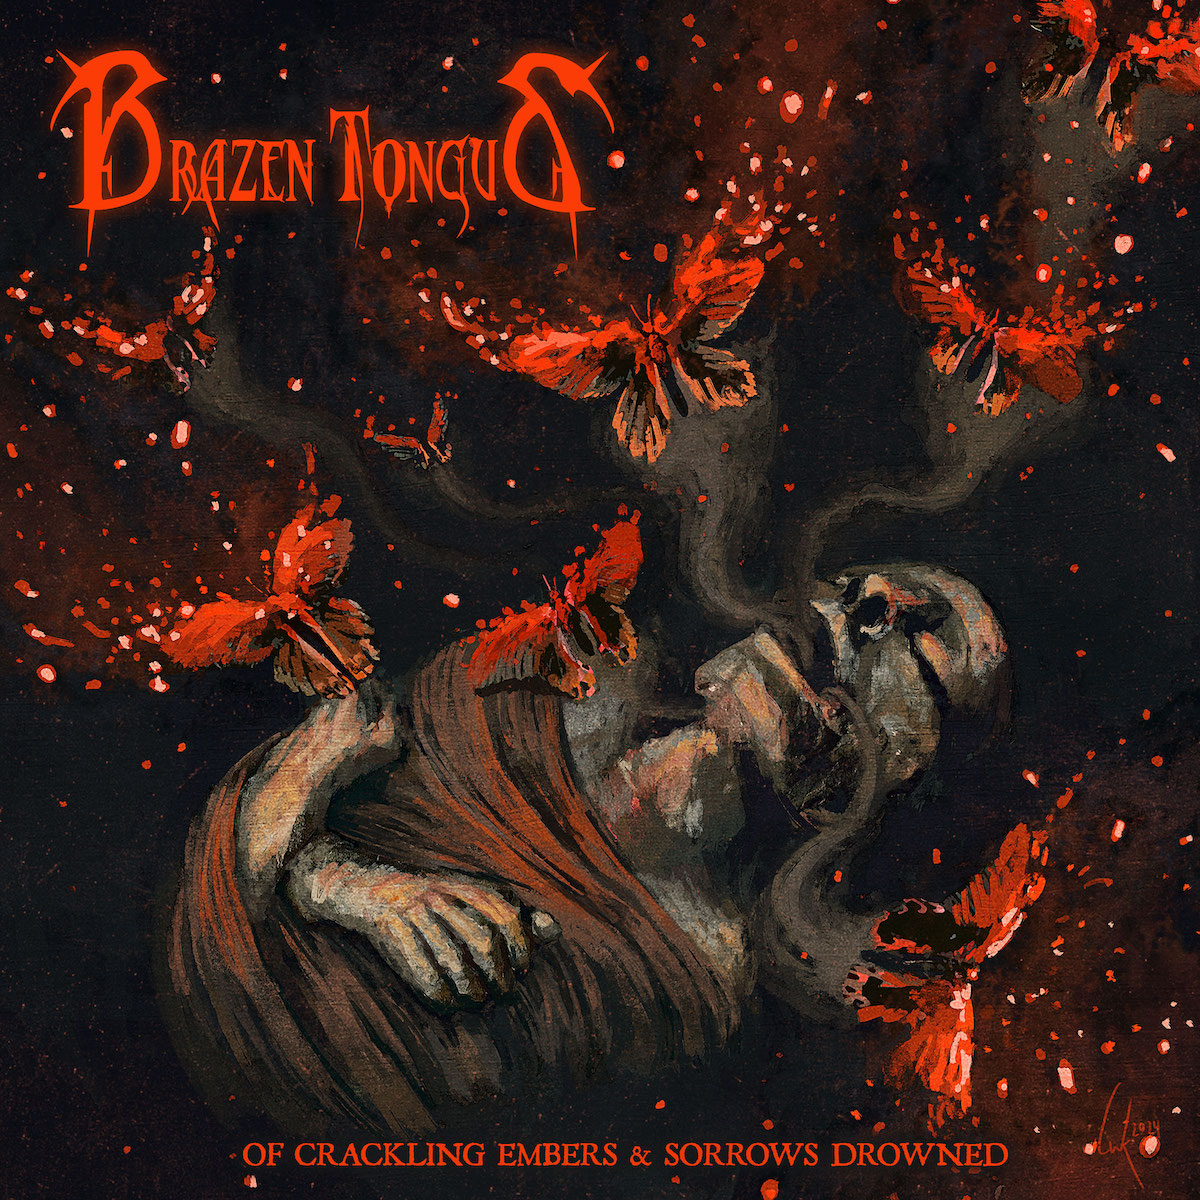 DEBUT ALBUM REVIEW: Of Crackling Embers & Sorrows Drowned by Brazen Tongue